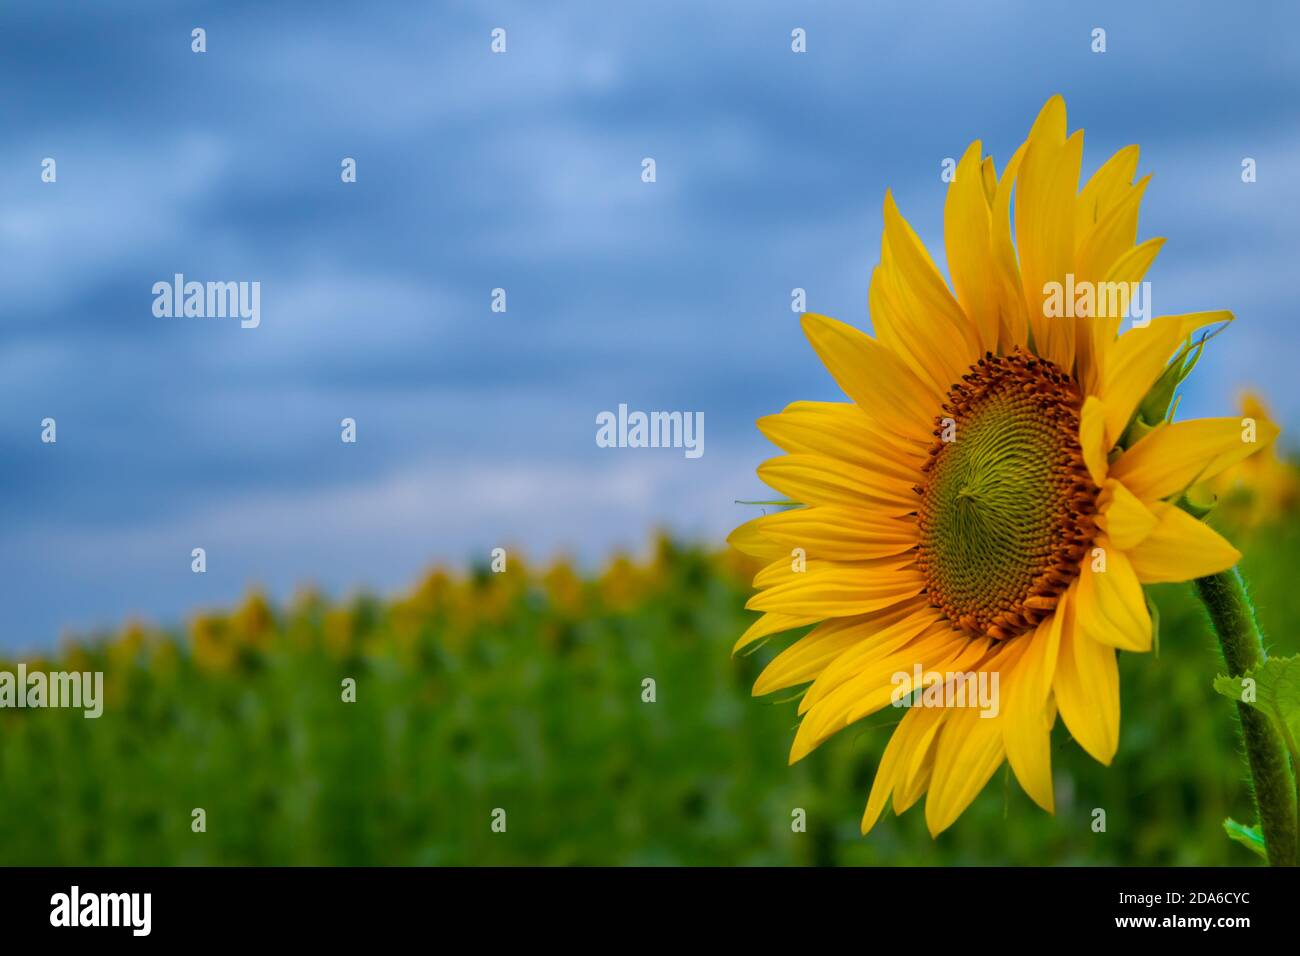 Close-up of a beautiful young sunflower in the field. Blue clouds, stormy sky. Sunflowers field. Blurred background. A field with yellow flowers. Stock Photo